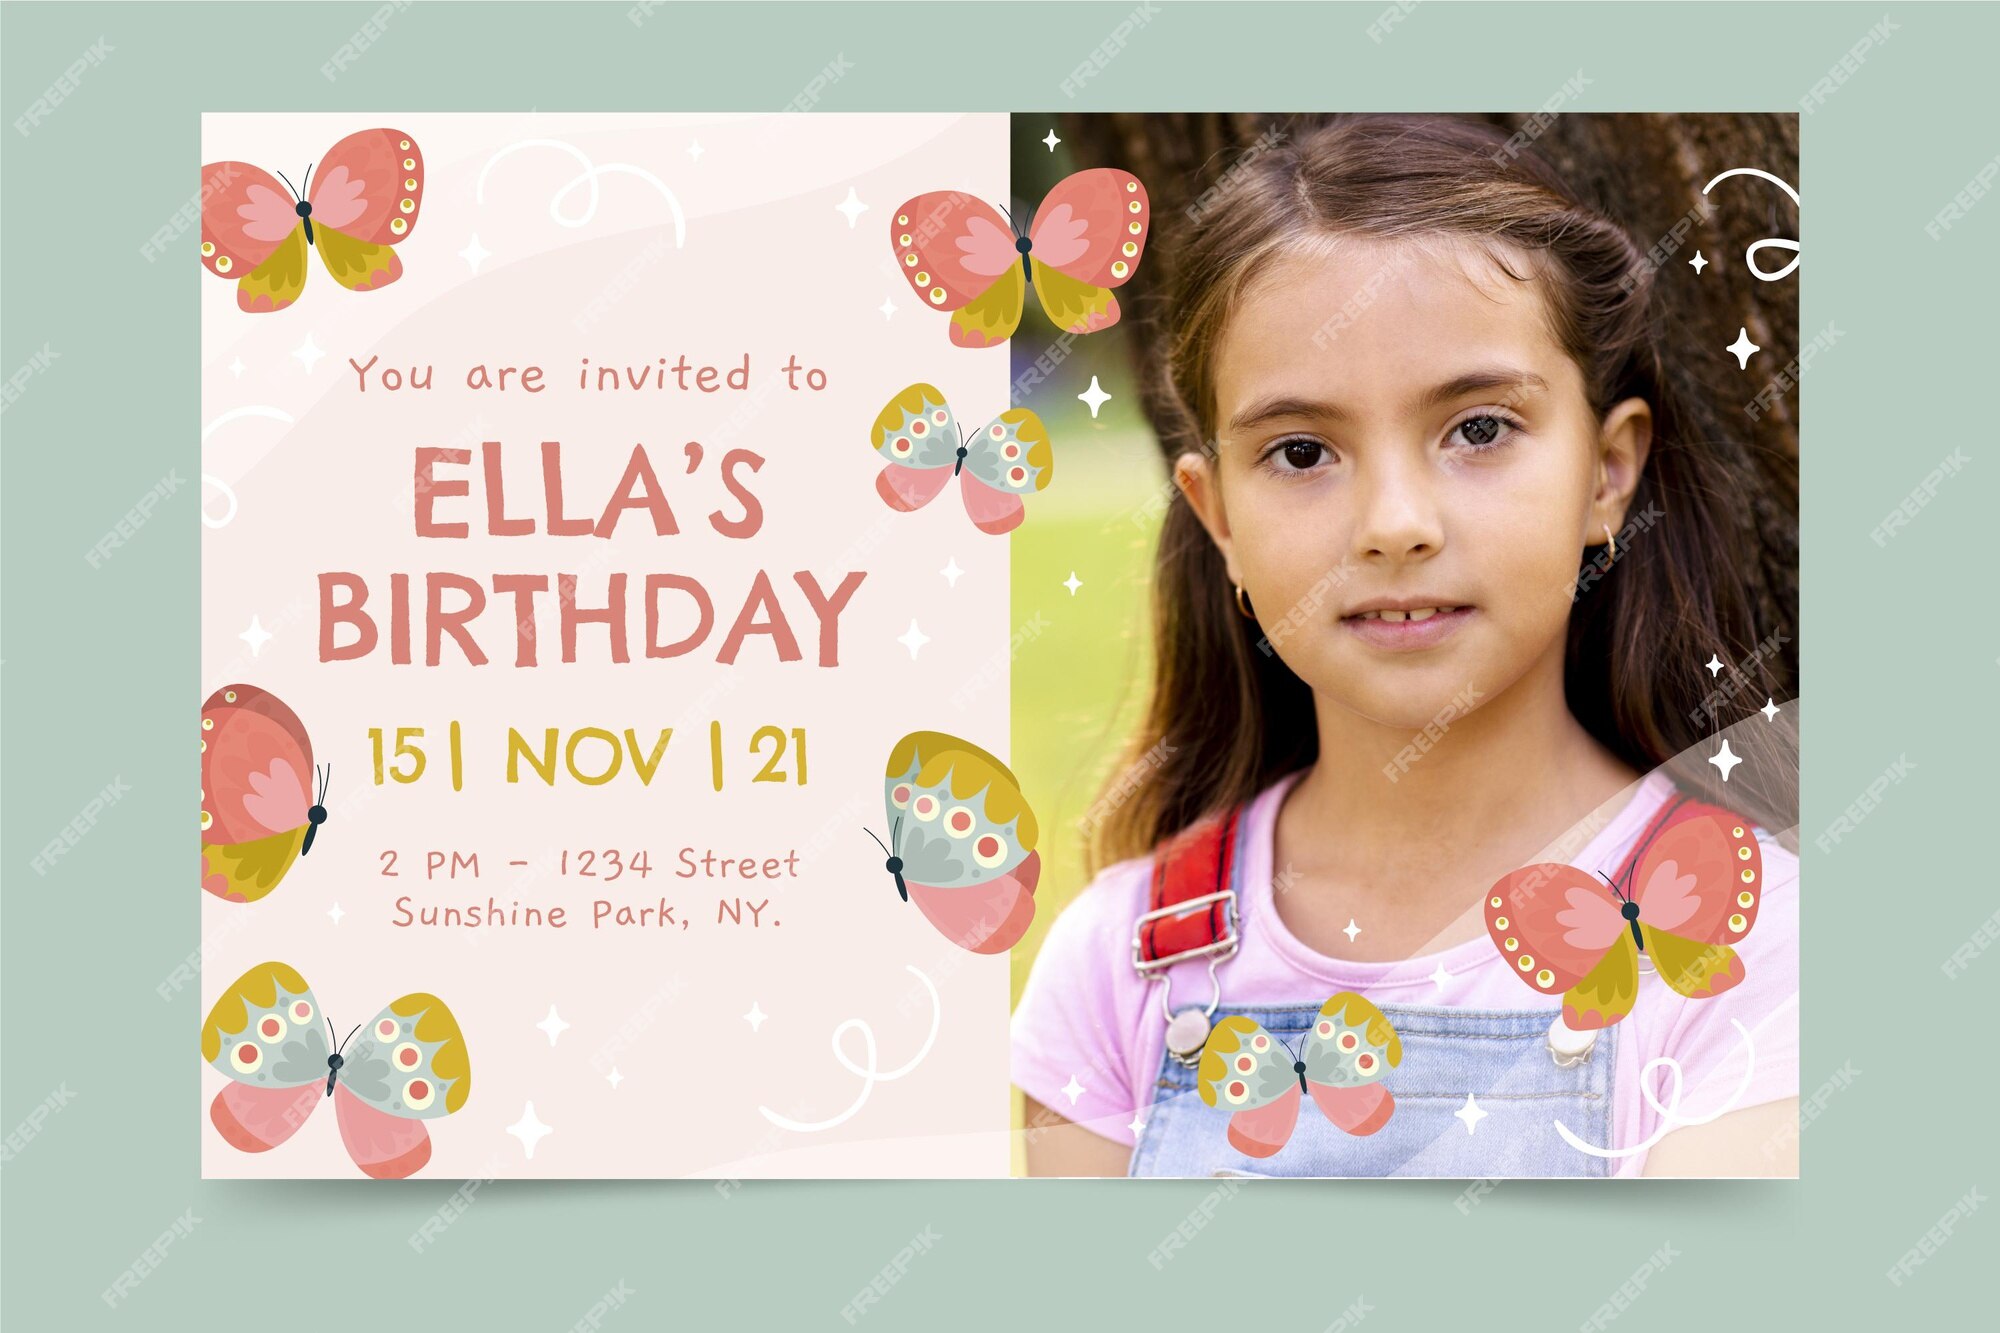 free-vector-butterfly-birthday-invitation-template-with-photo